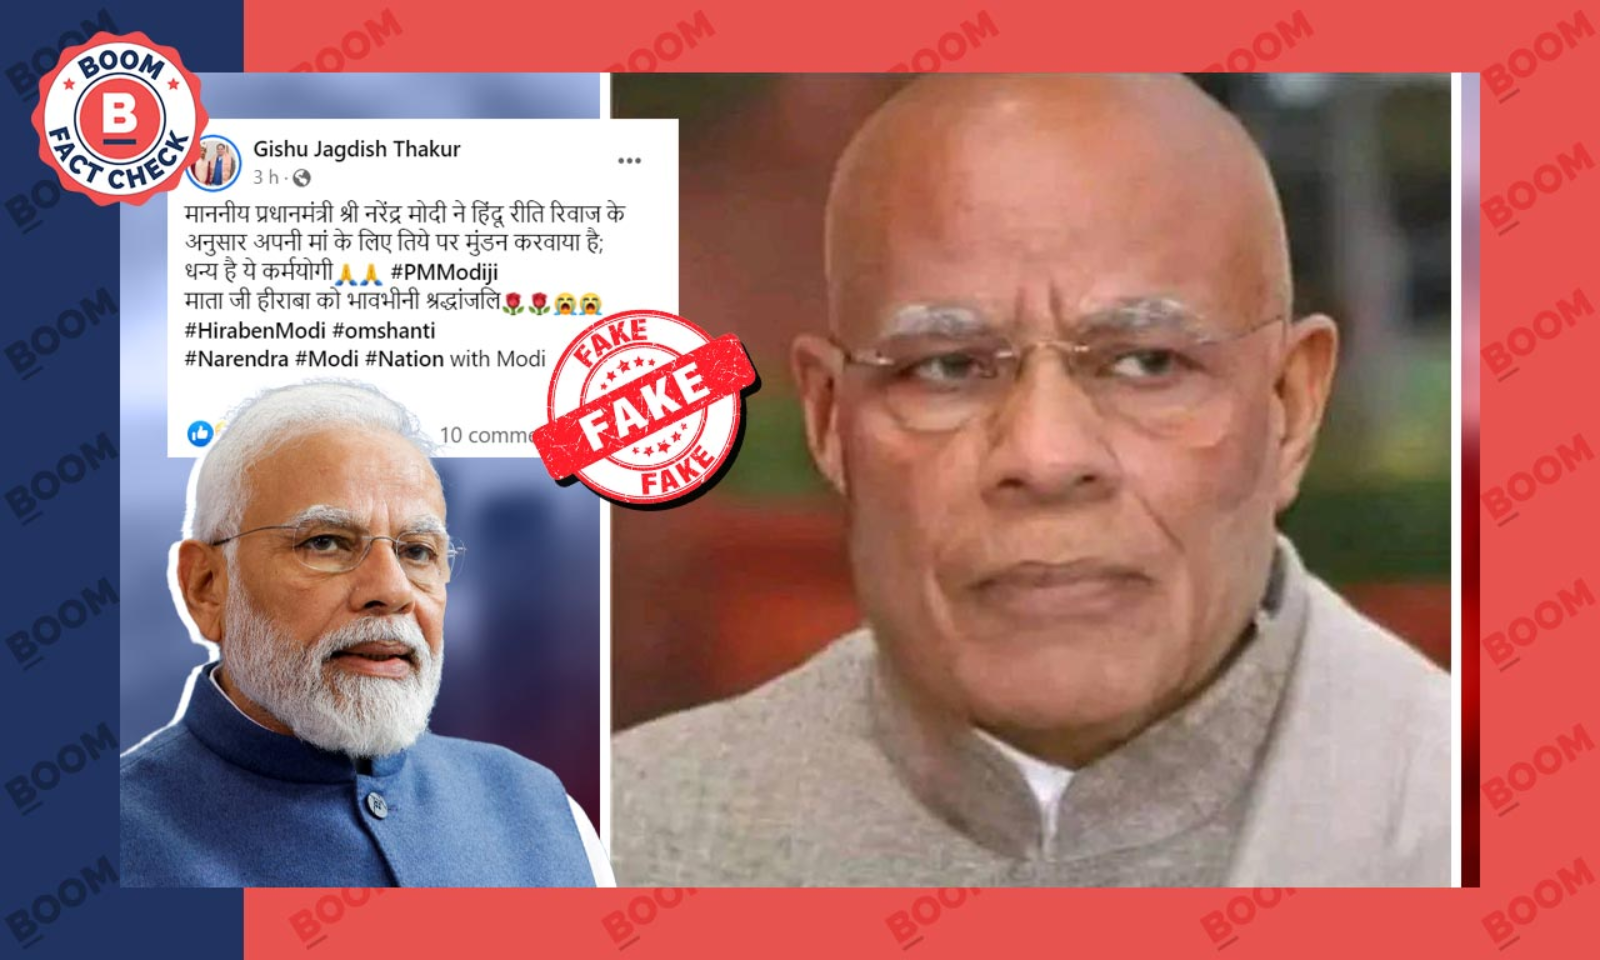 Photo Of PM Modi With Shaved Head Following Mother's Demise Is Morphed |  BOOM